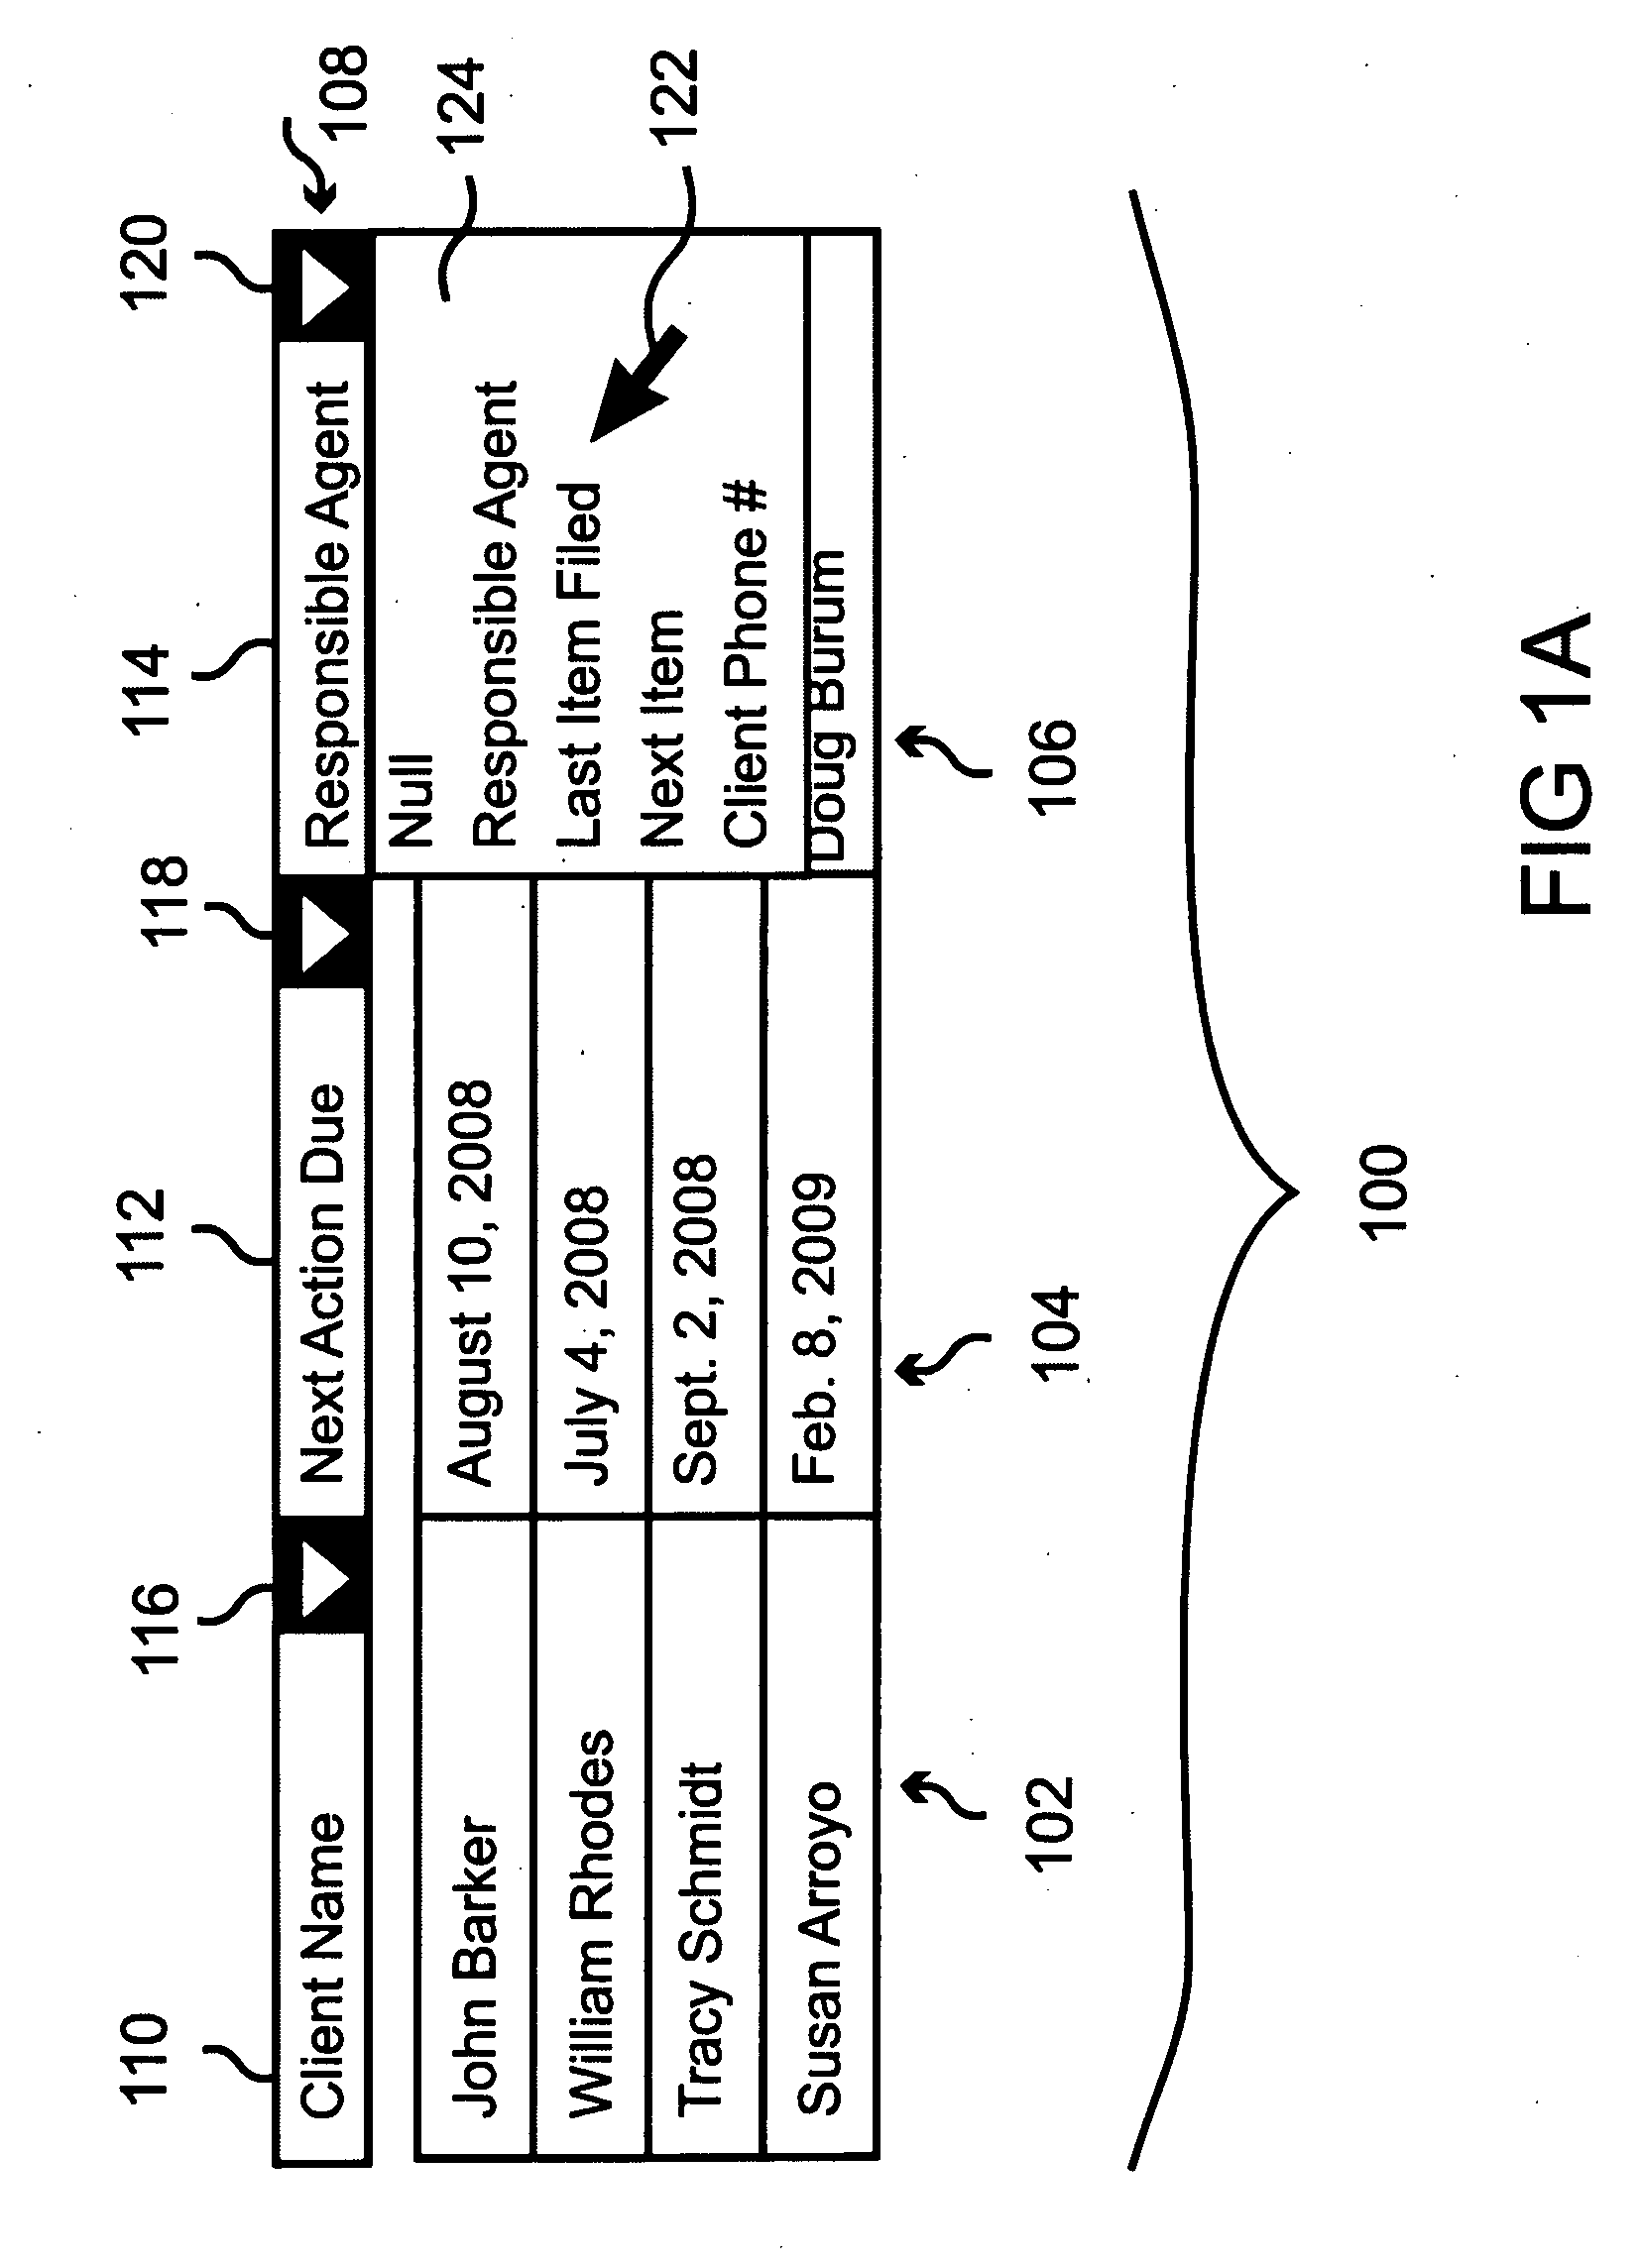 Multi-choice controls for selecting data groups to be displayed